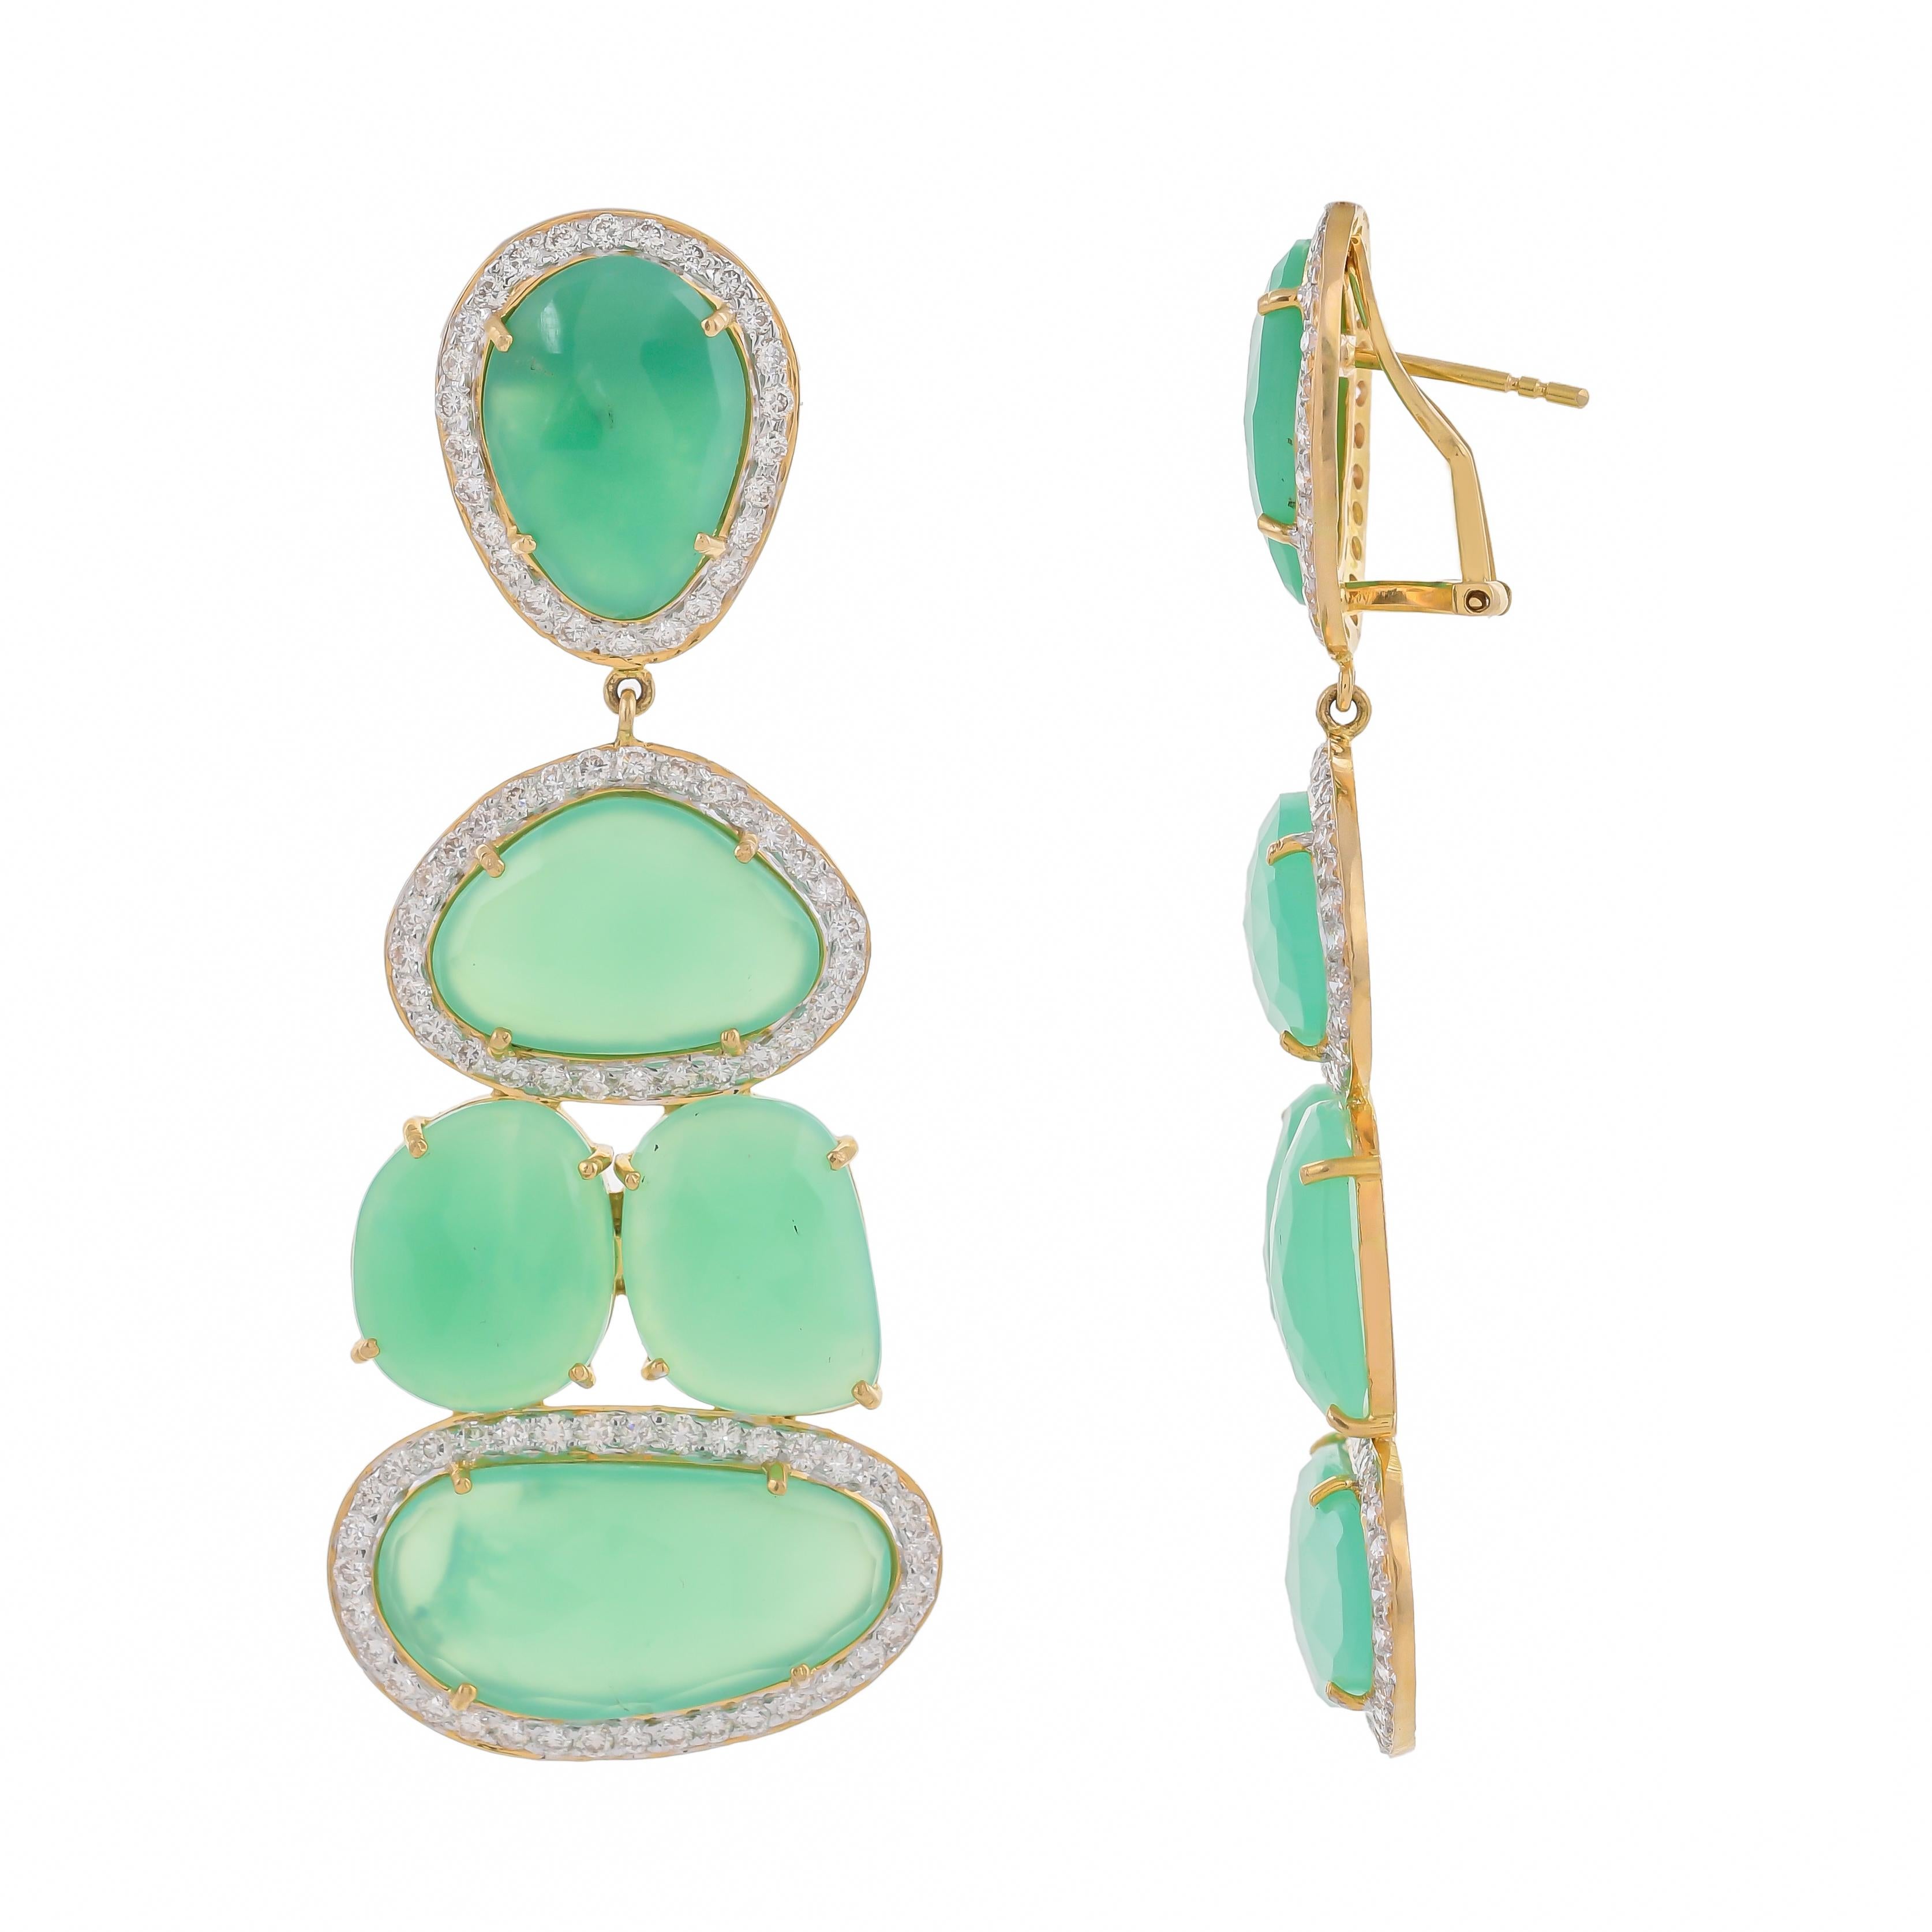 These bold and distinctive earrings feature soft green chrysoprase weighing approximately 52.36 carats which are highlighted with 3.46 carats sparkling diamonds mounted in 18 karats gold. These impressive Italian earrings are an exceptional quality